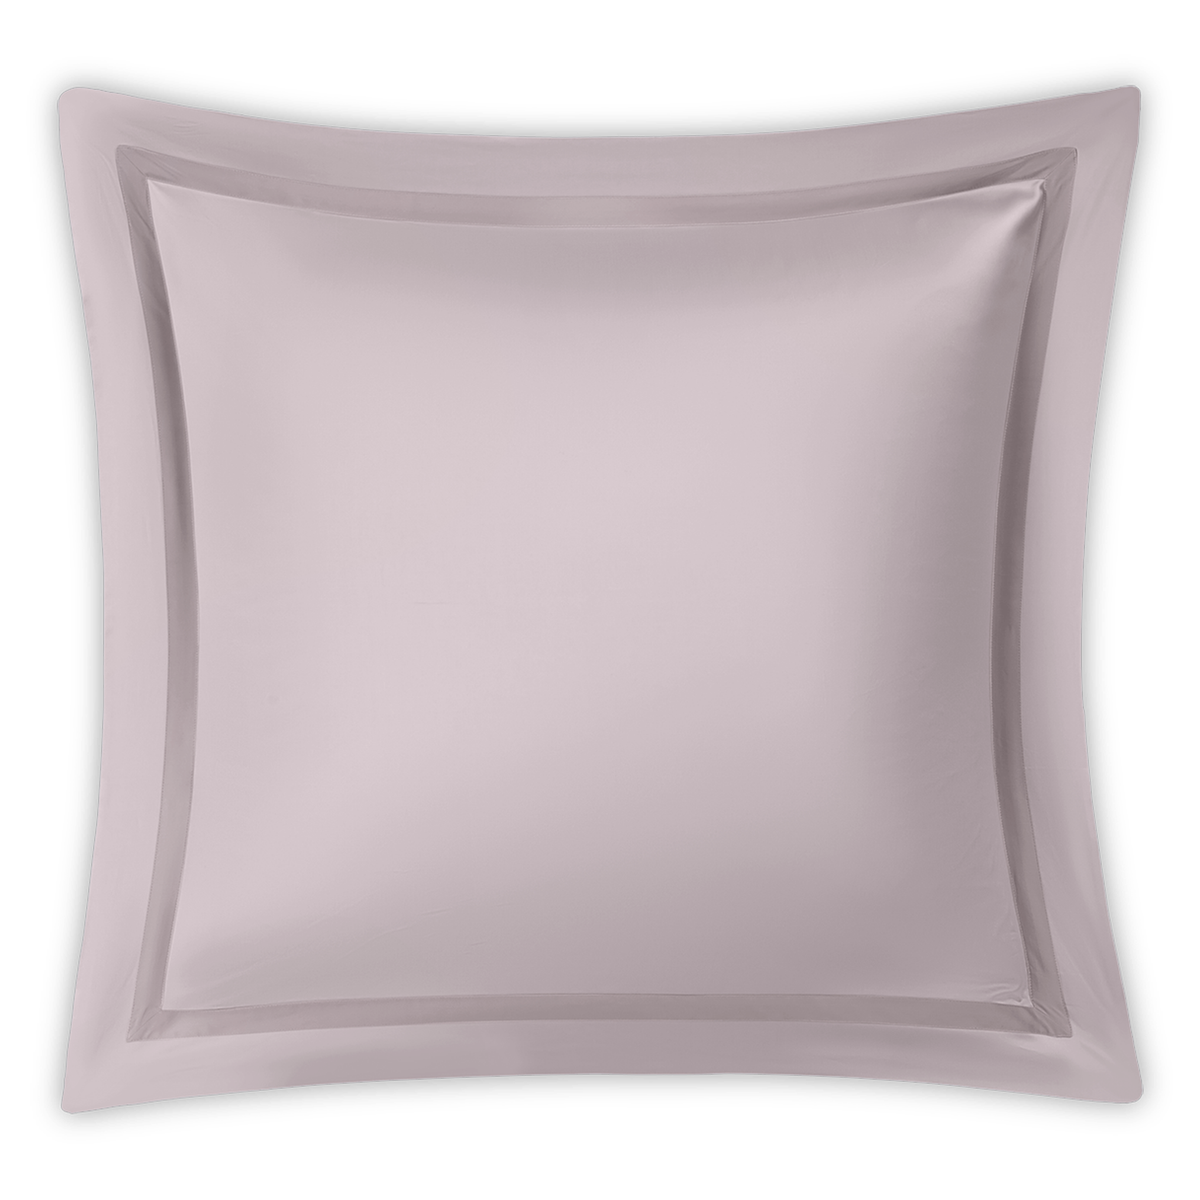 Euro Sham of Matouk Nocturne Bedding Collection in Color Deep Lilac